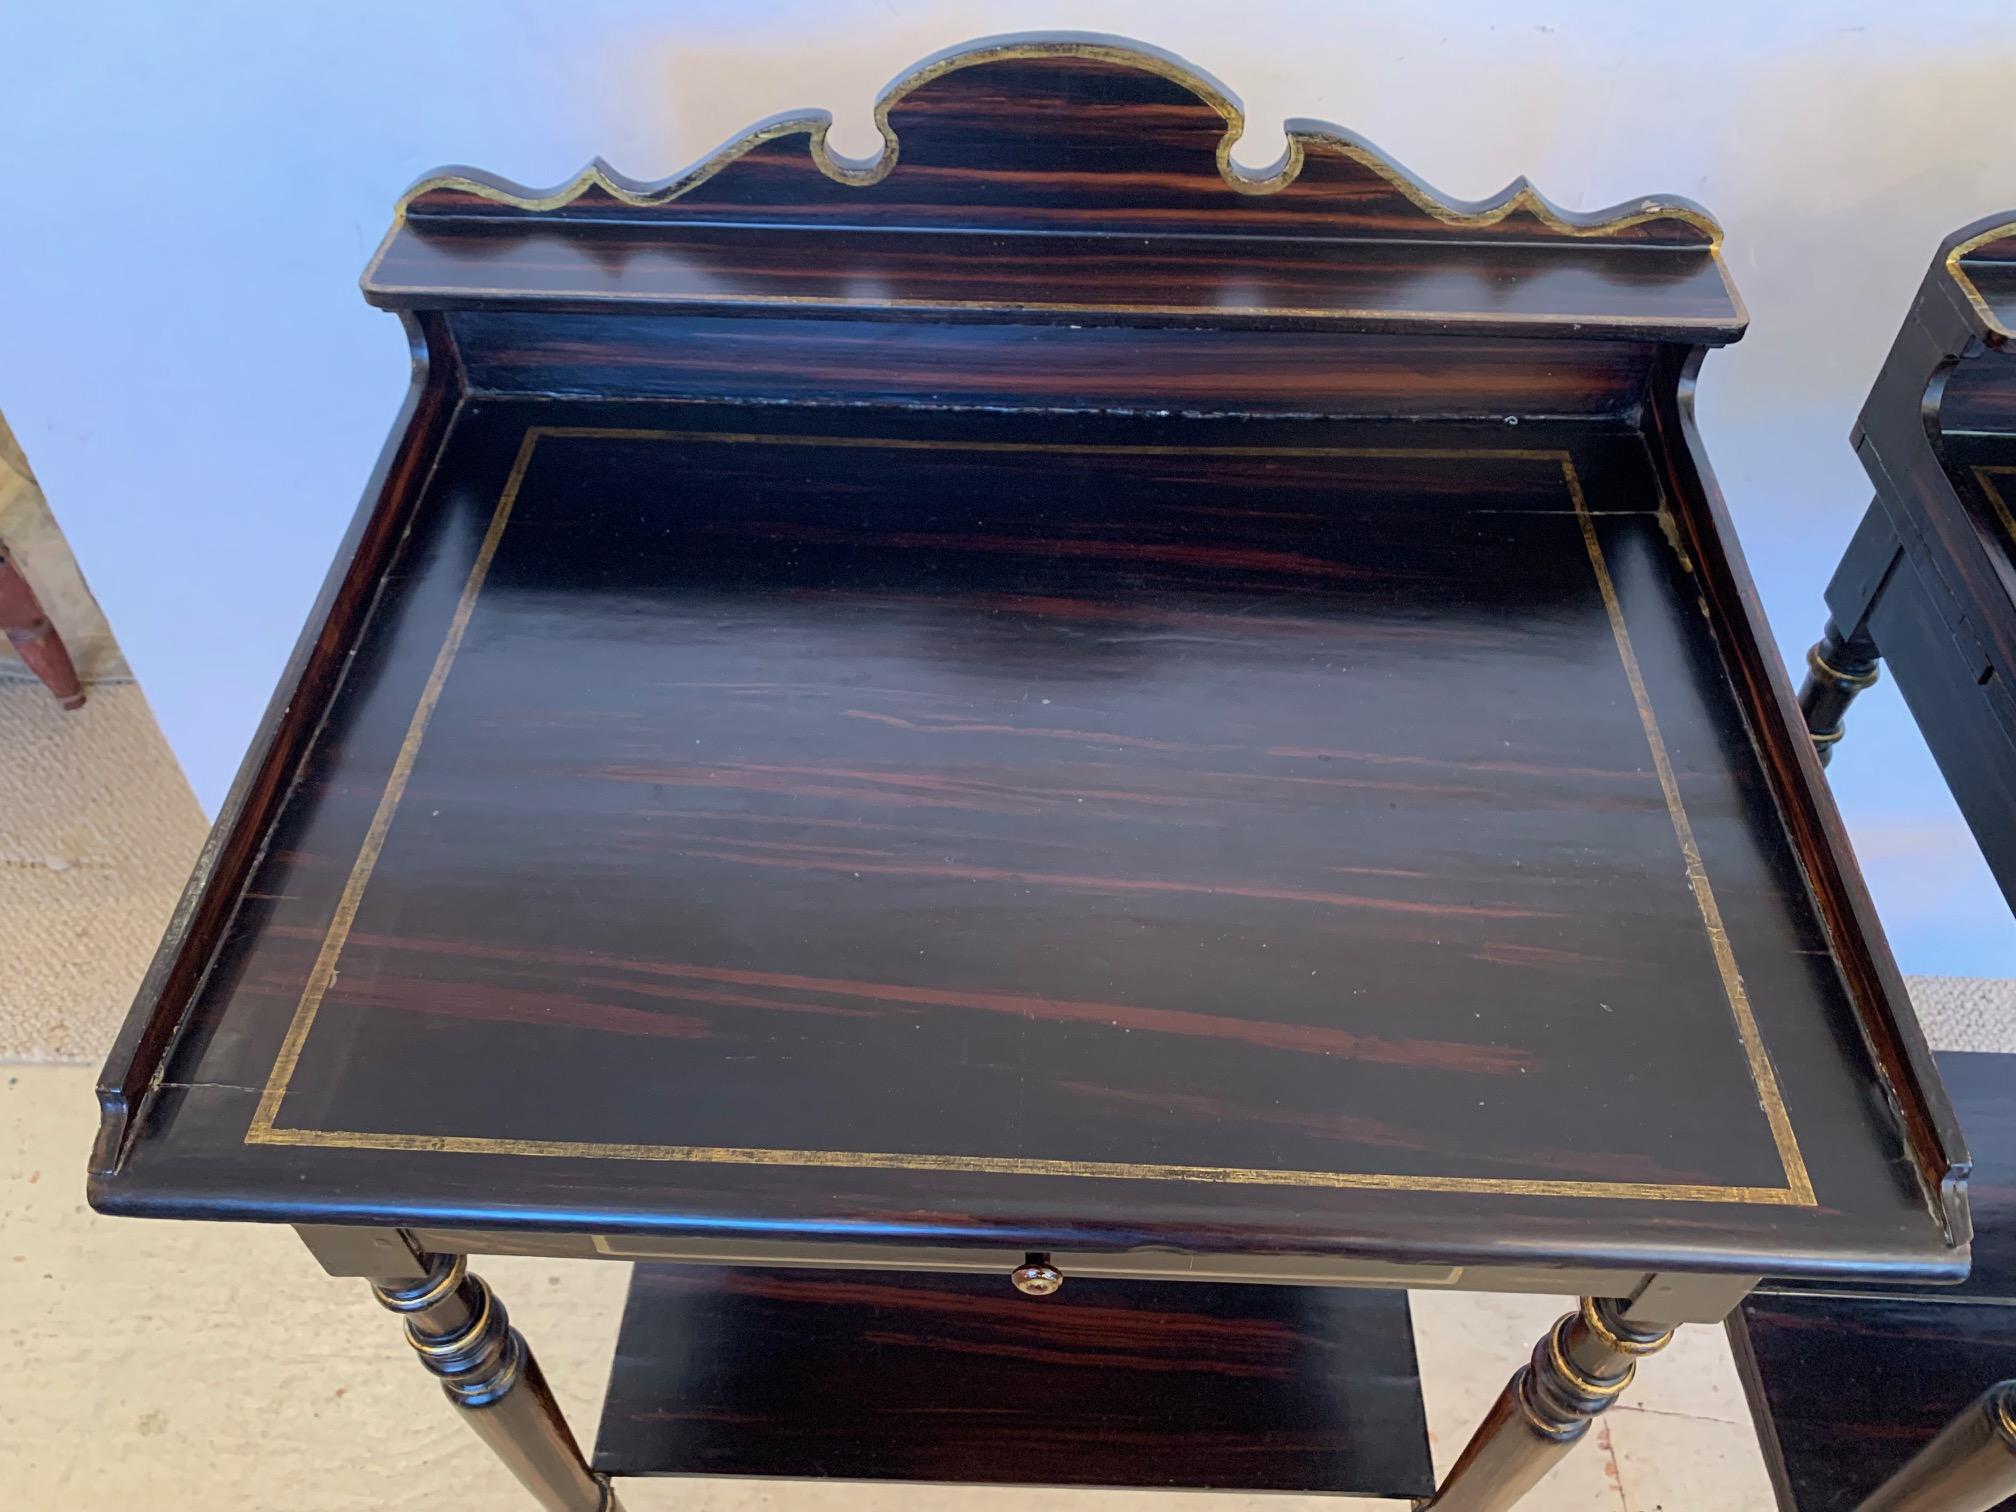 Lovely two tier beautiful grain painted night stand or end table having gilded embellishments including accent stripe around the top surface that looks like inlay.  Single drawer, lower tier, and decorative scalloped backsplash. Legs are carved and